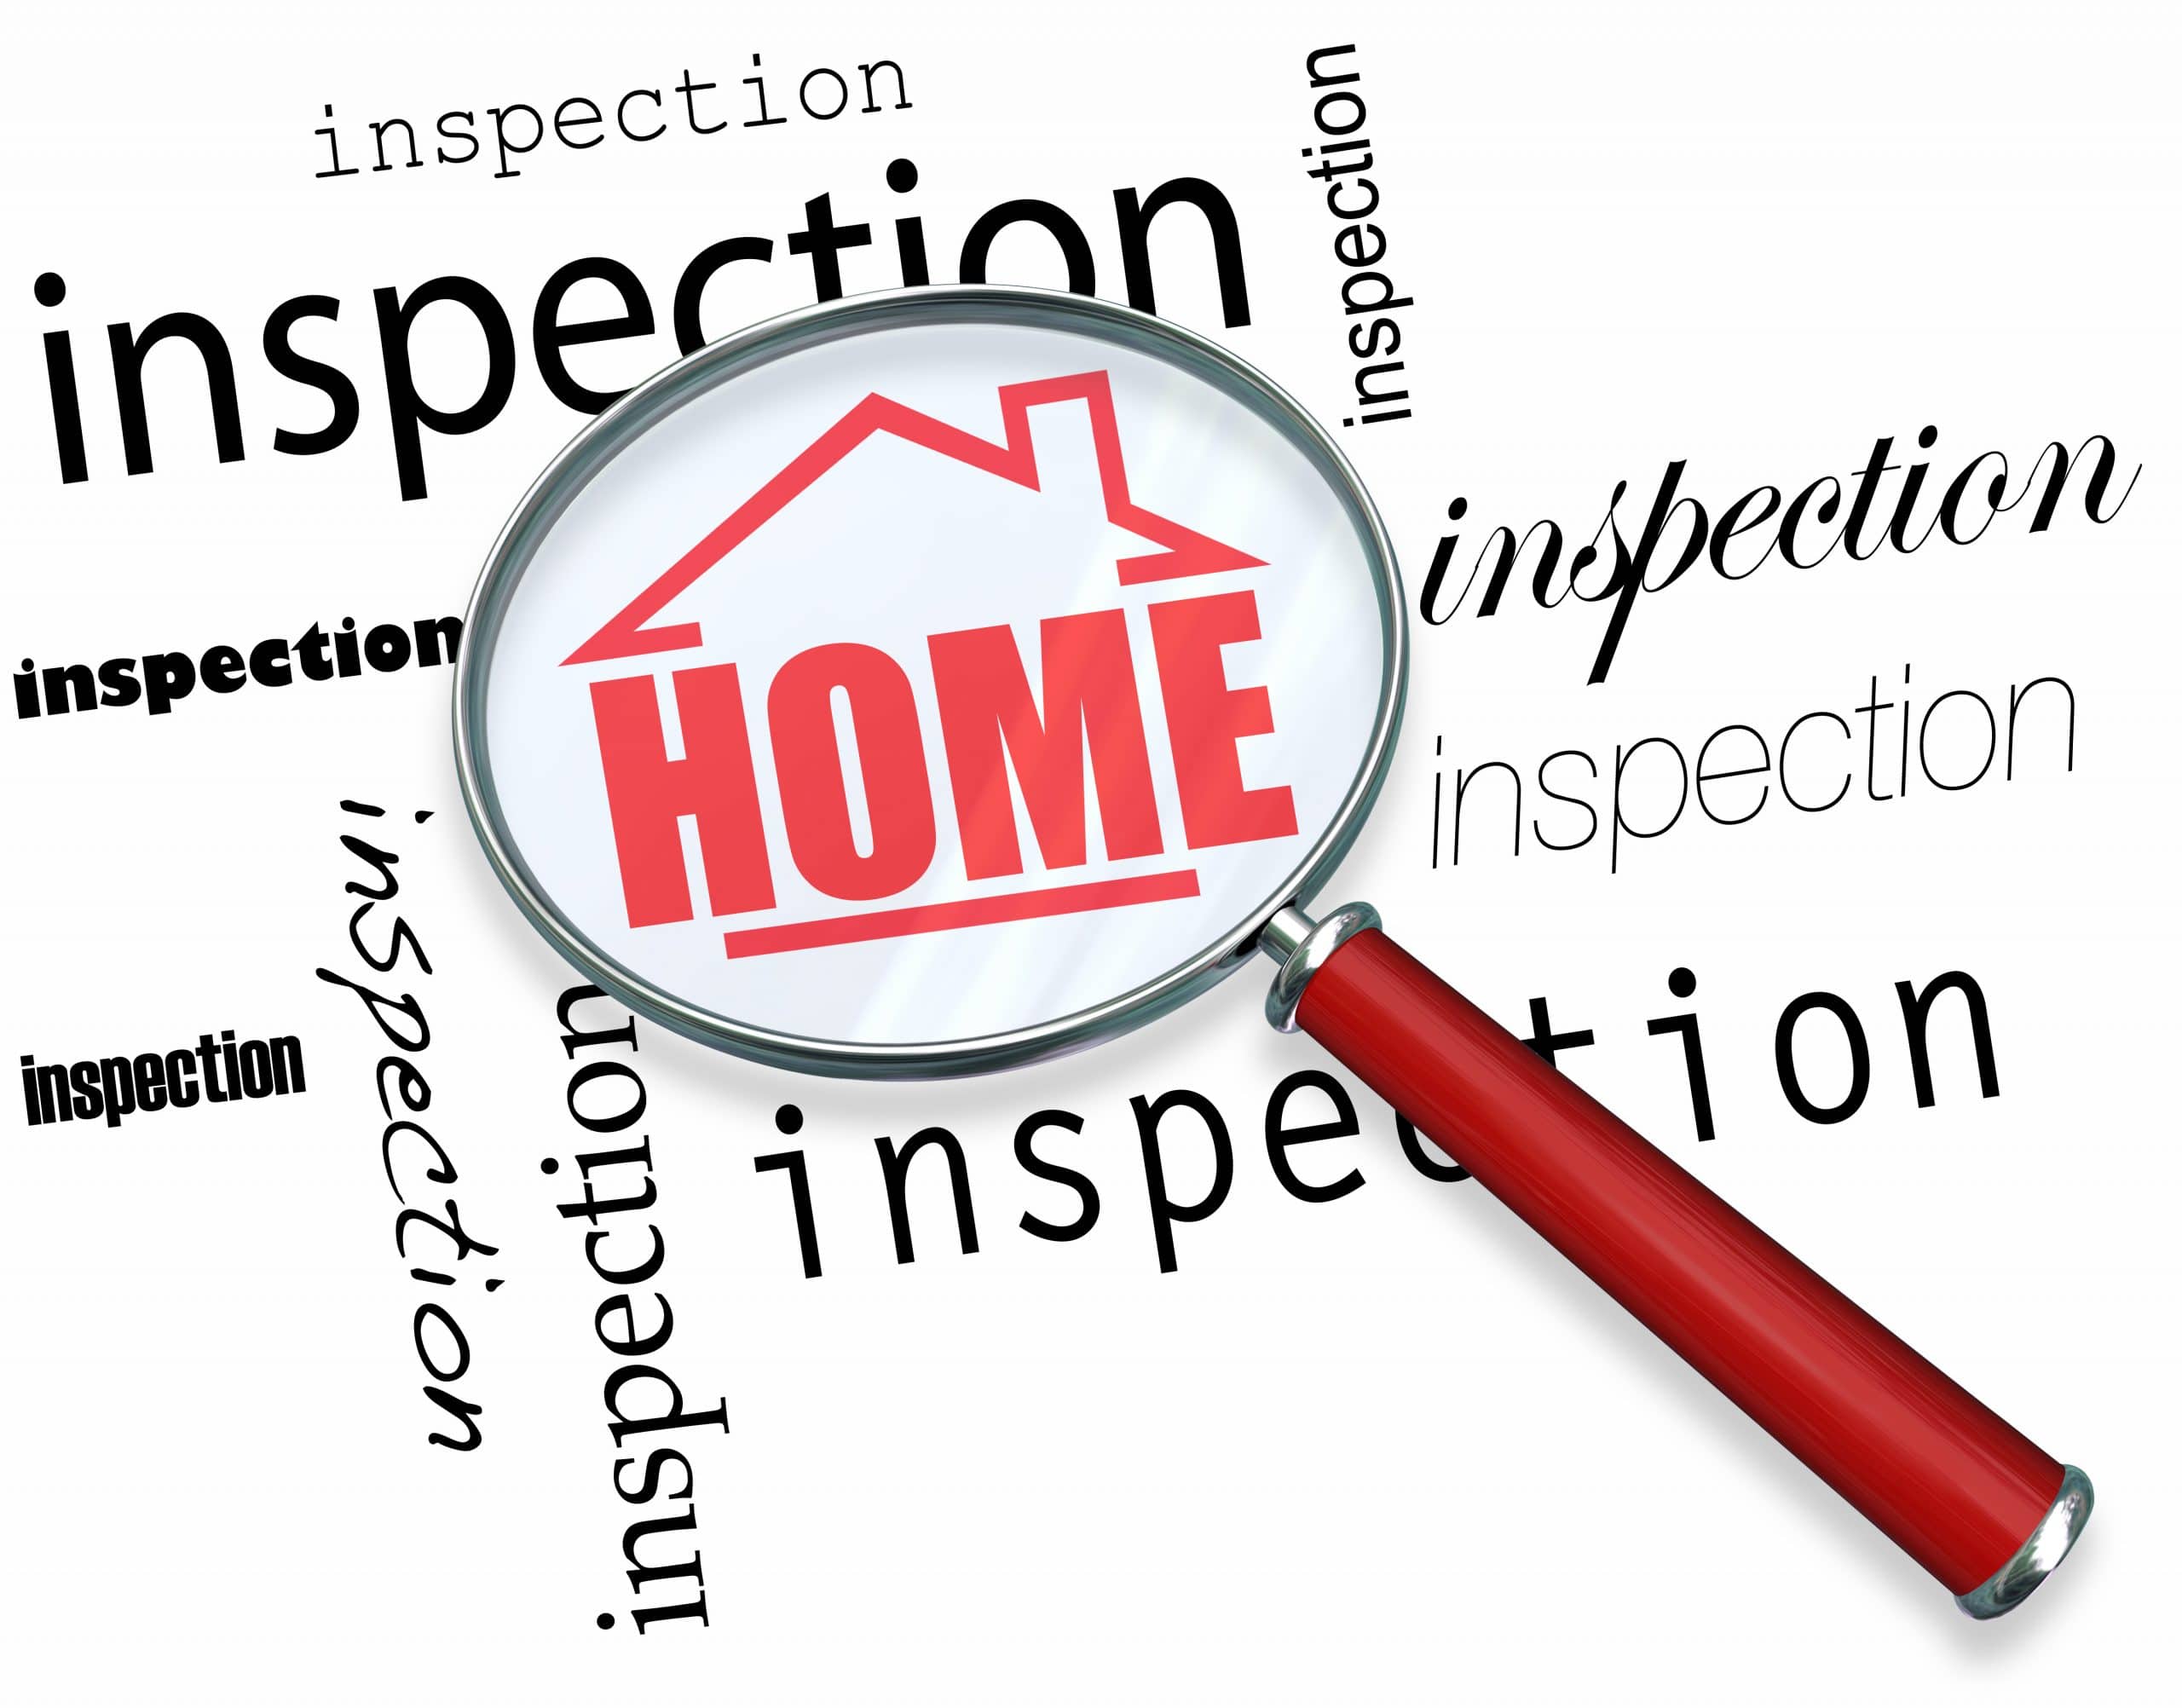 Home inspection under the focus